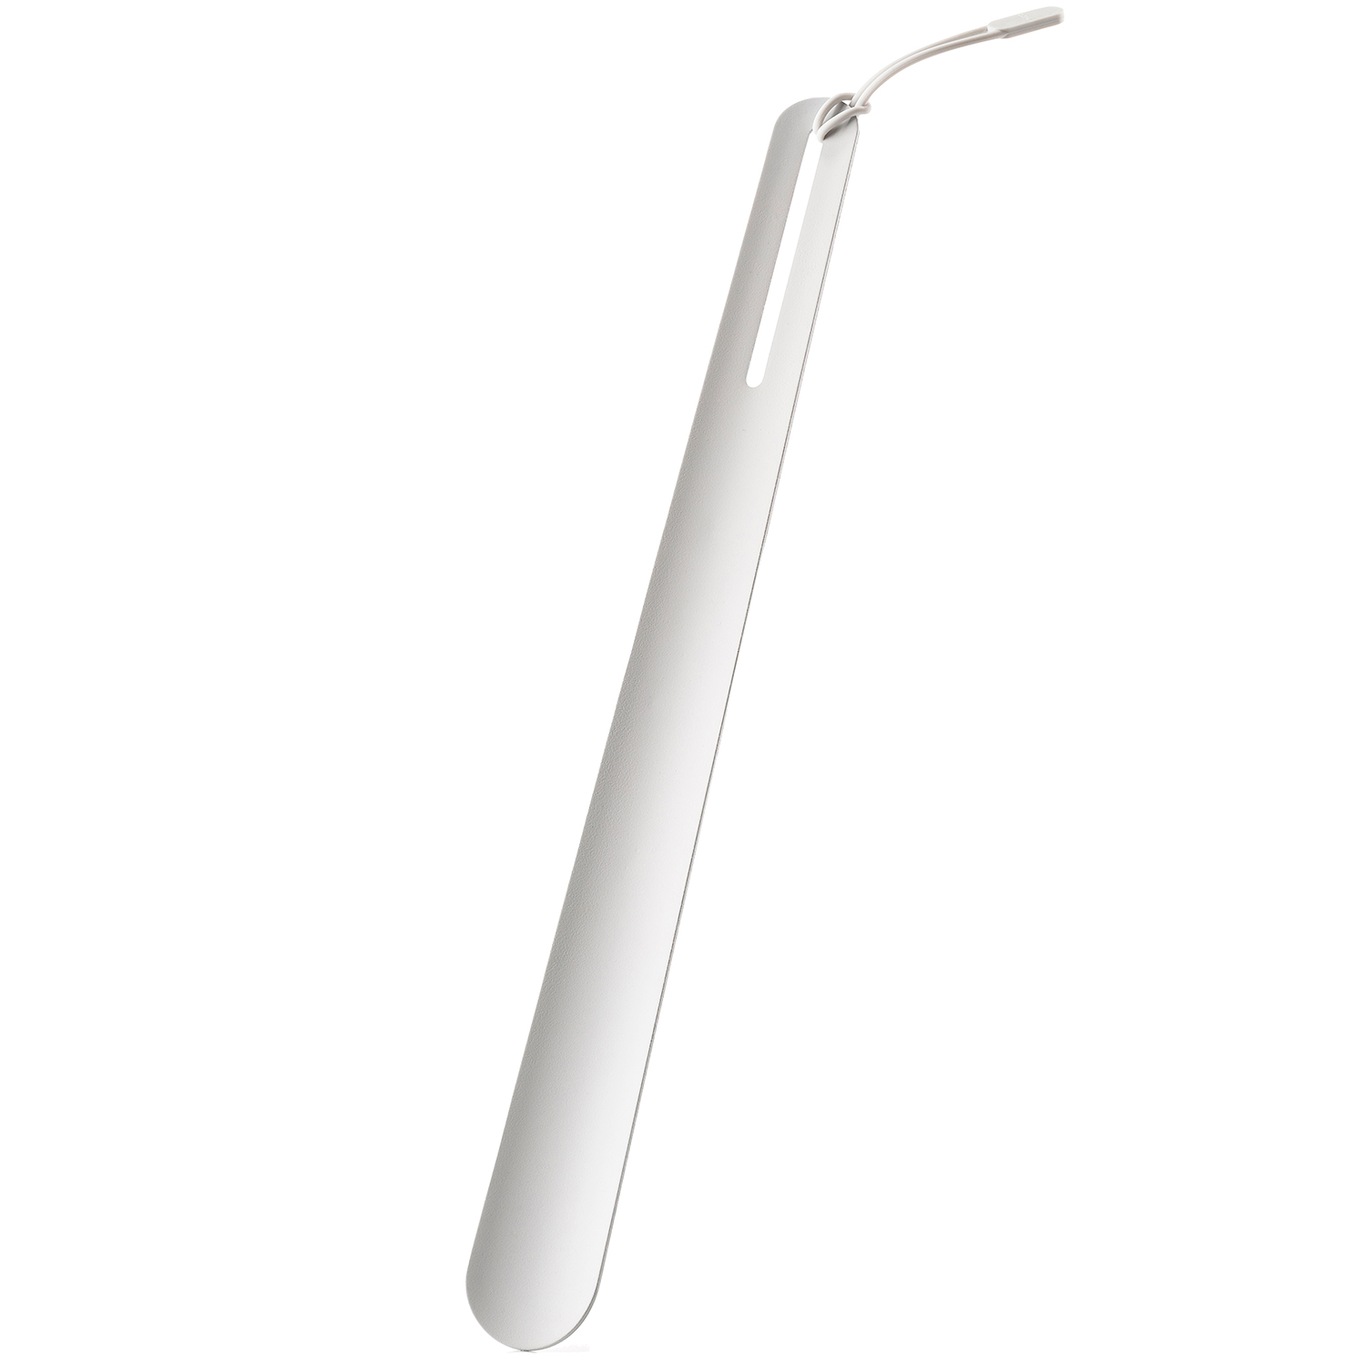 A-Shoehorn Shoehorn 45cm, Soft Grey